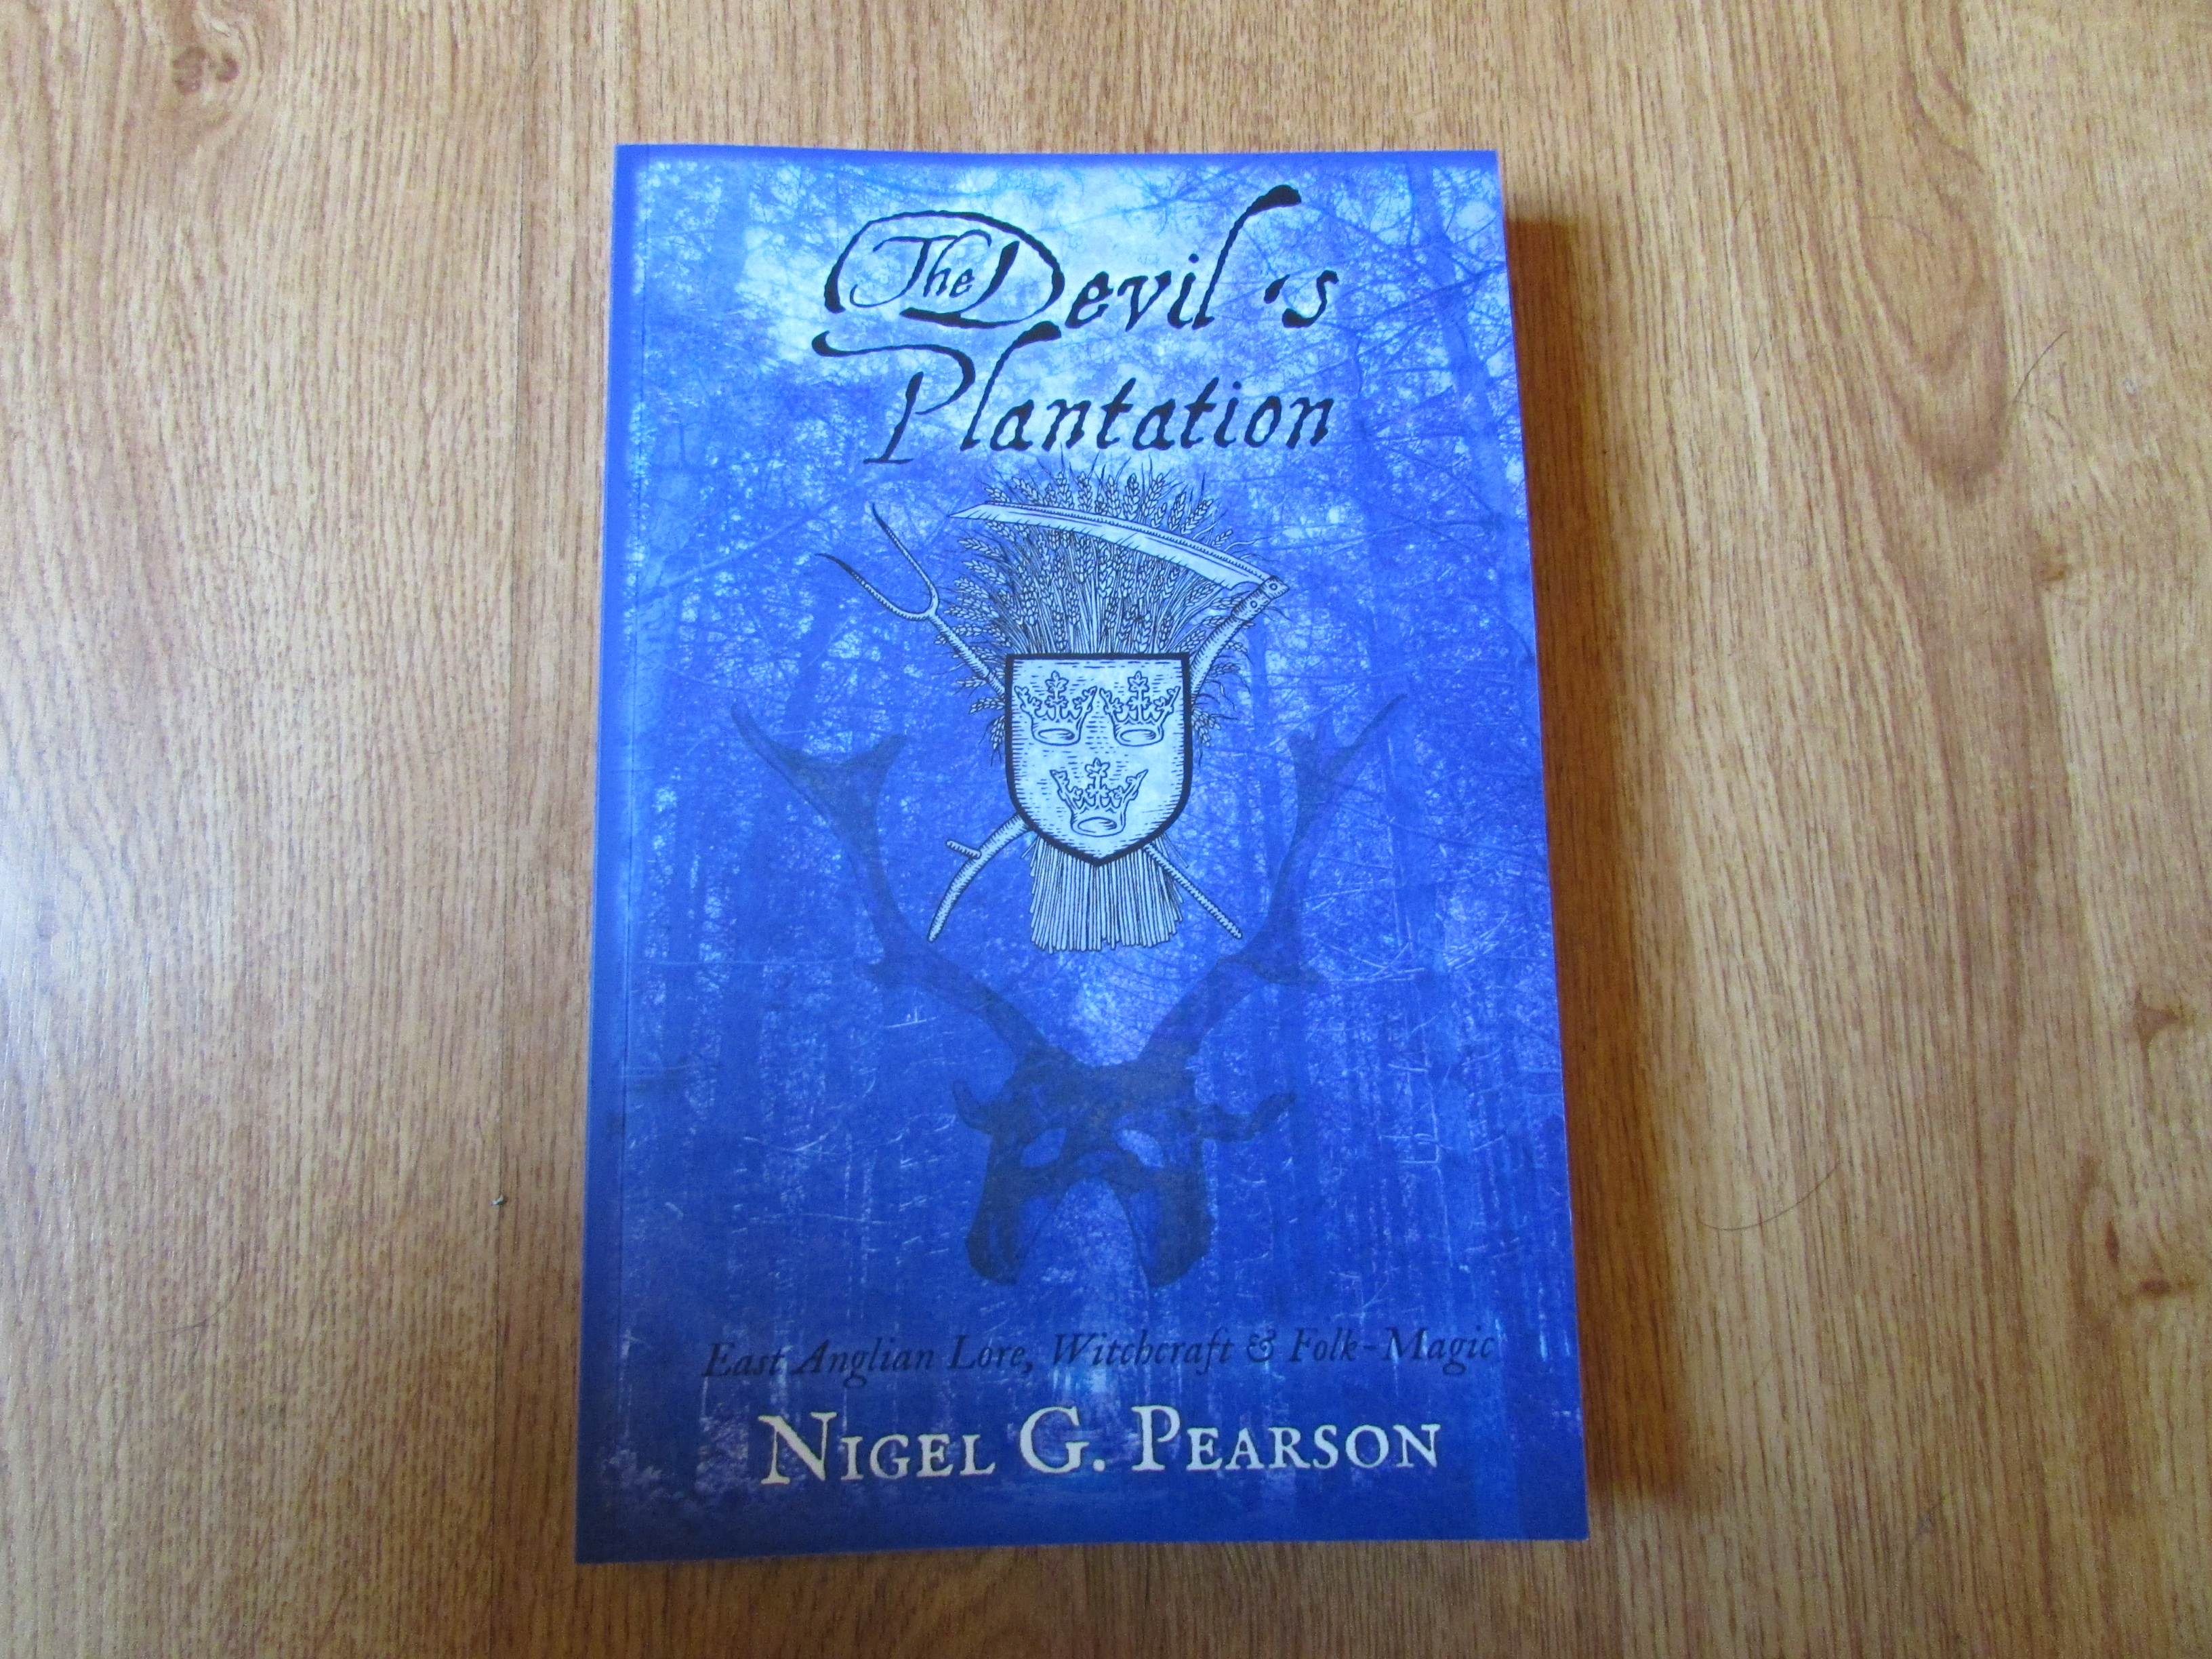 "The Devil's Plantation", by Nigel G. Pearson. Paperback Edition.